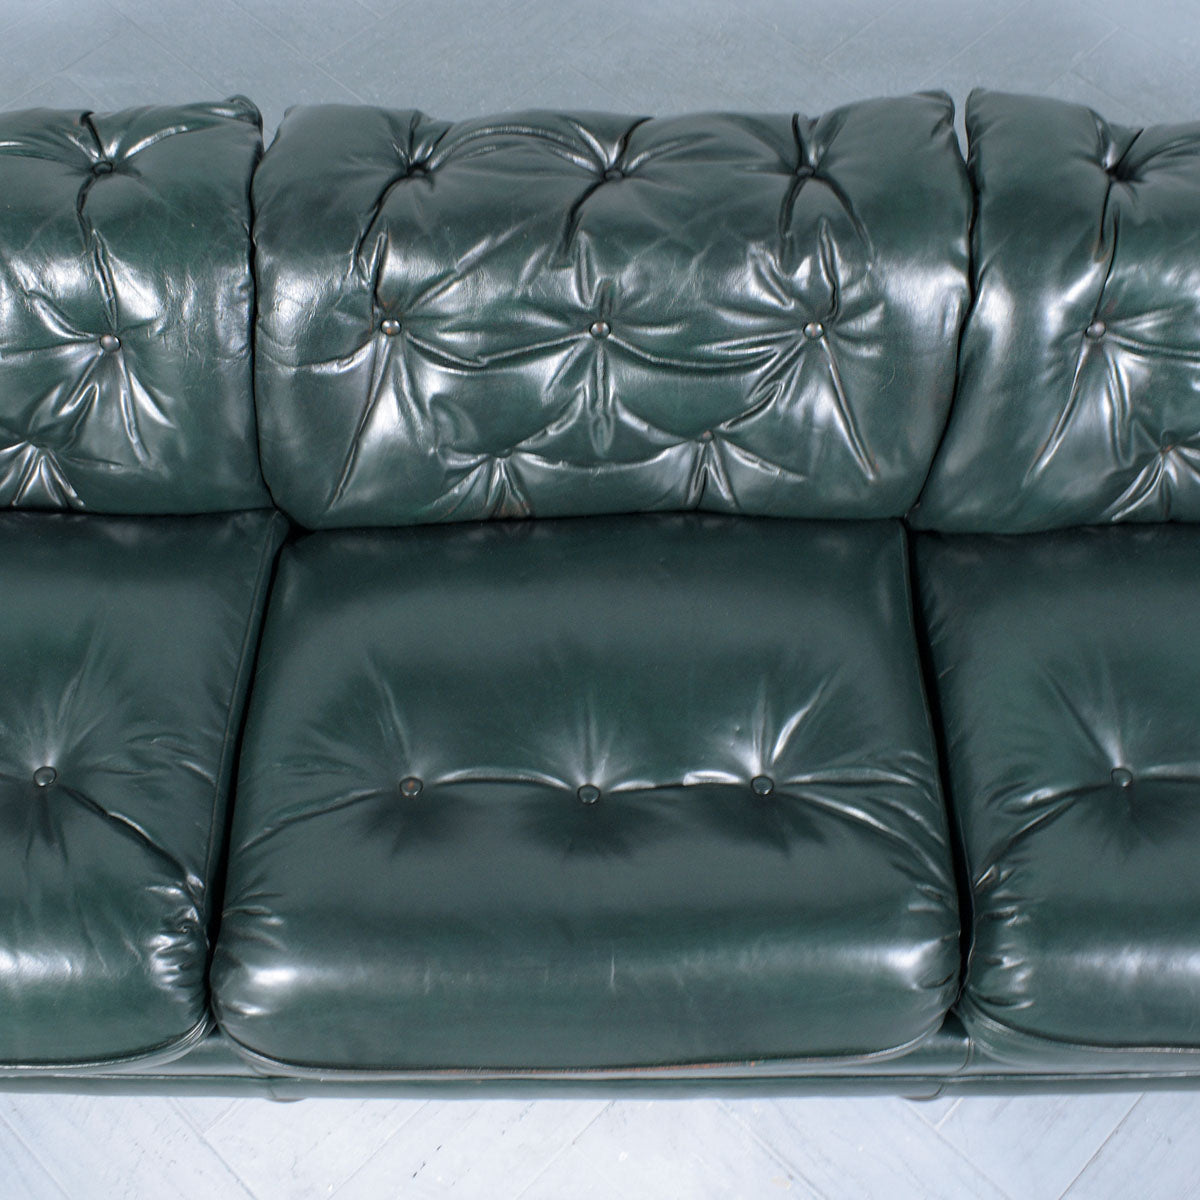 Vintage 1960s Green Tufted Chesterfield Leather Sofa